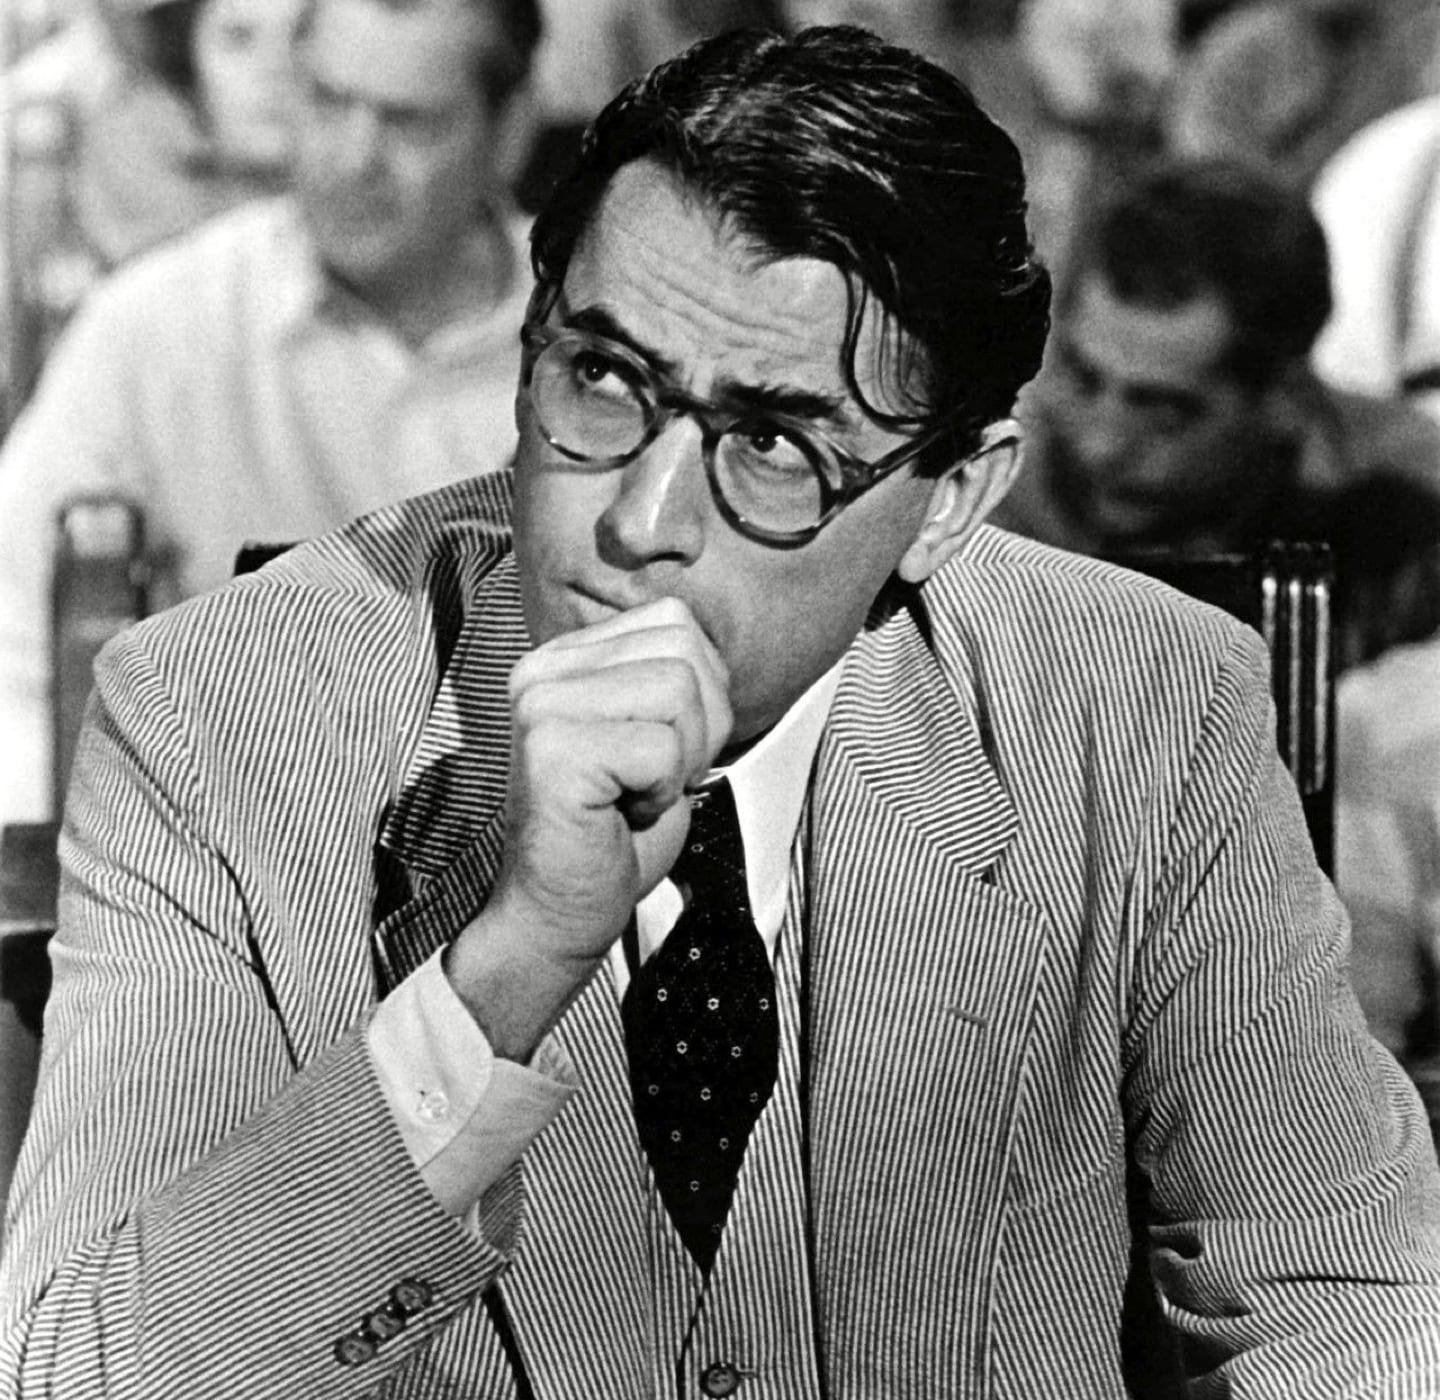 Gregory Peck, the iconic actor behind the frame | OP Stories UK